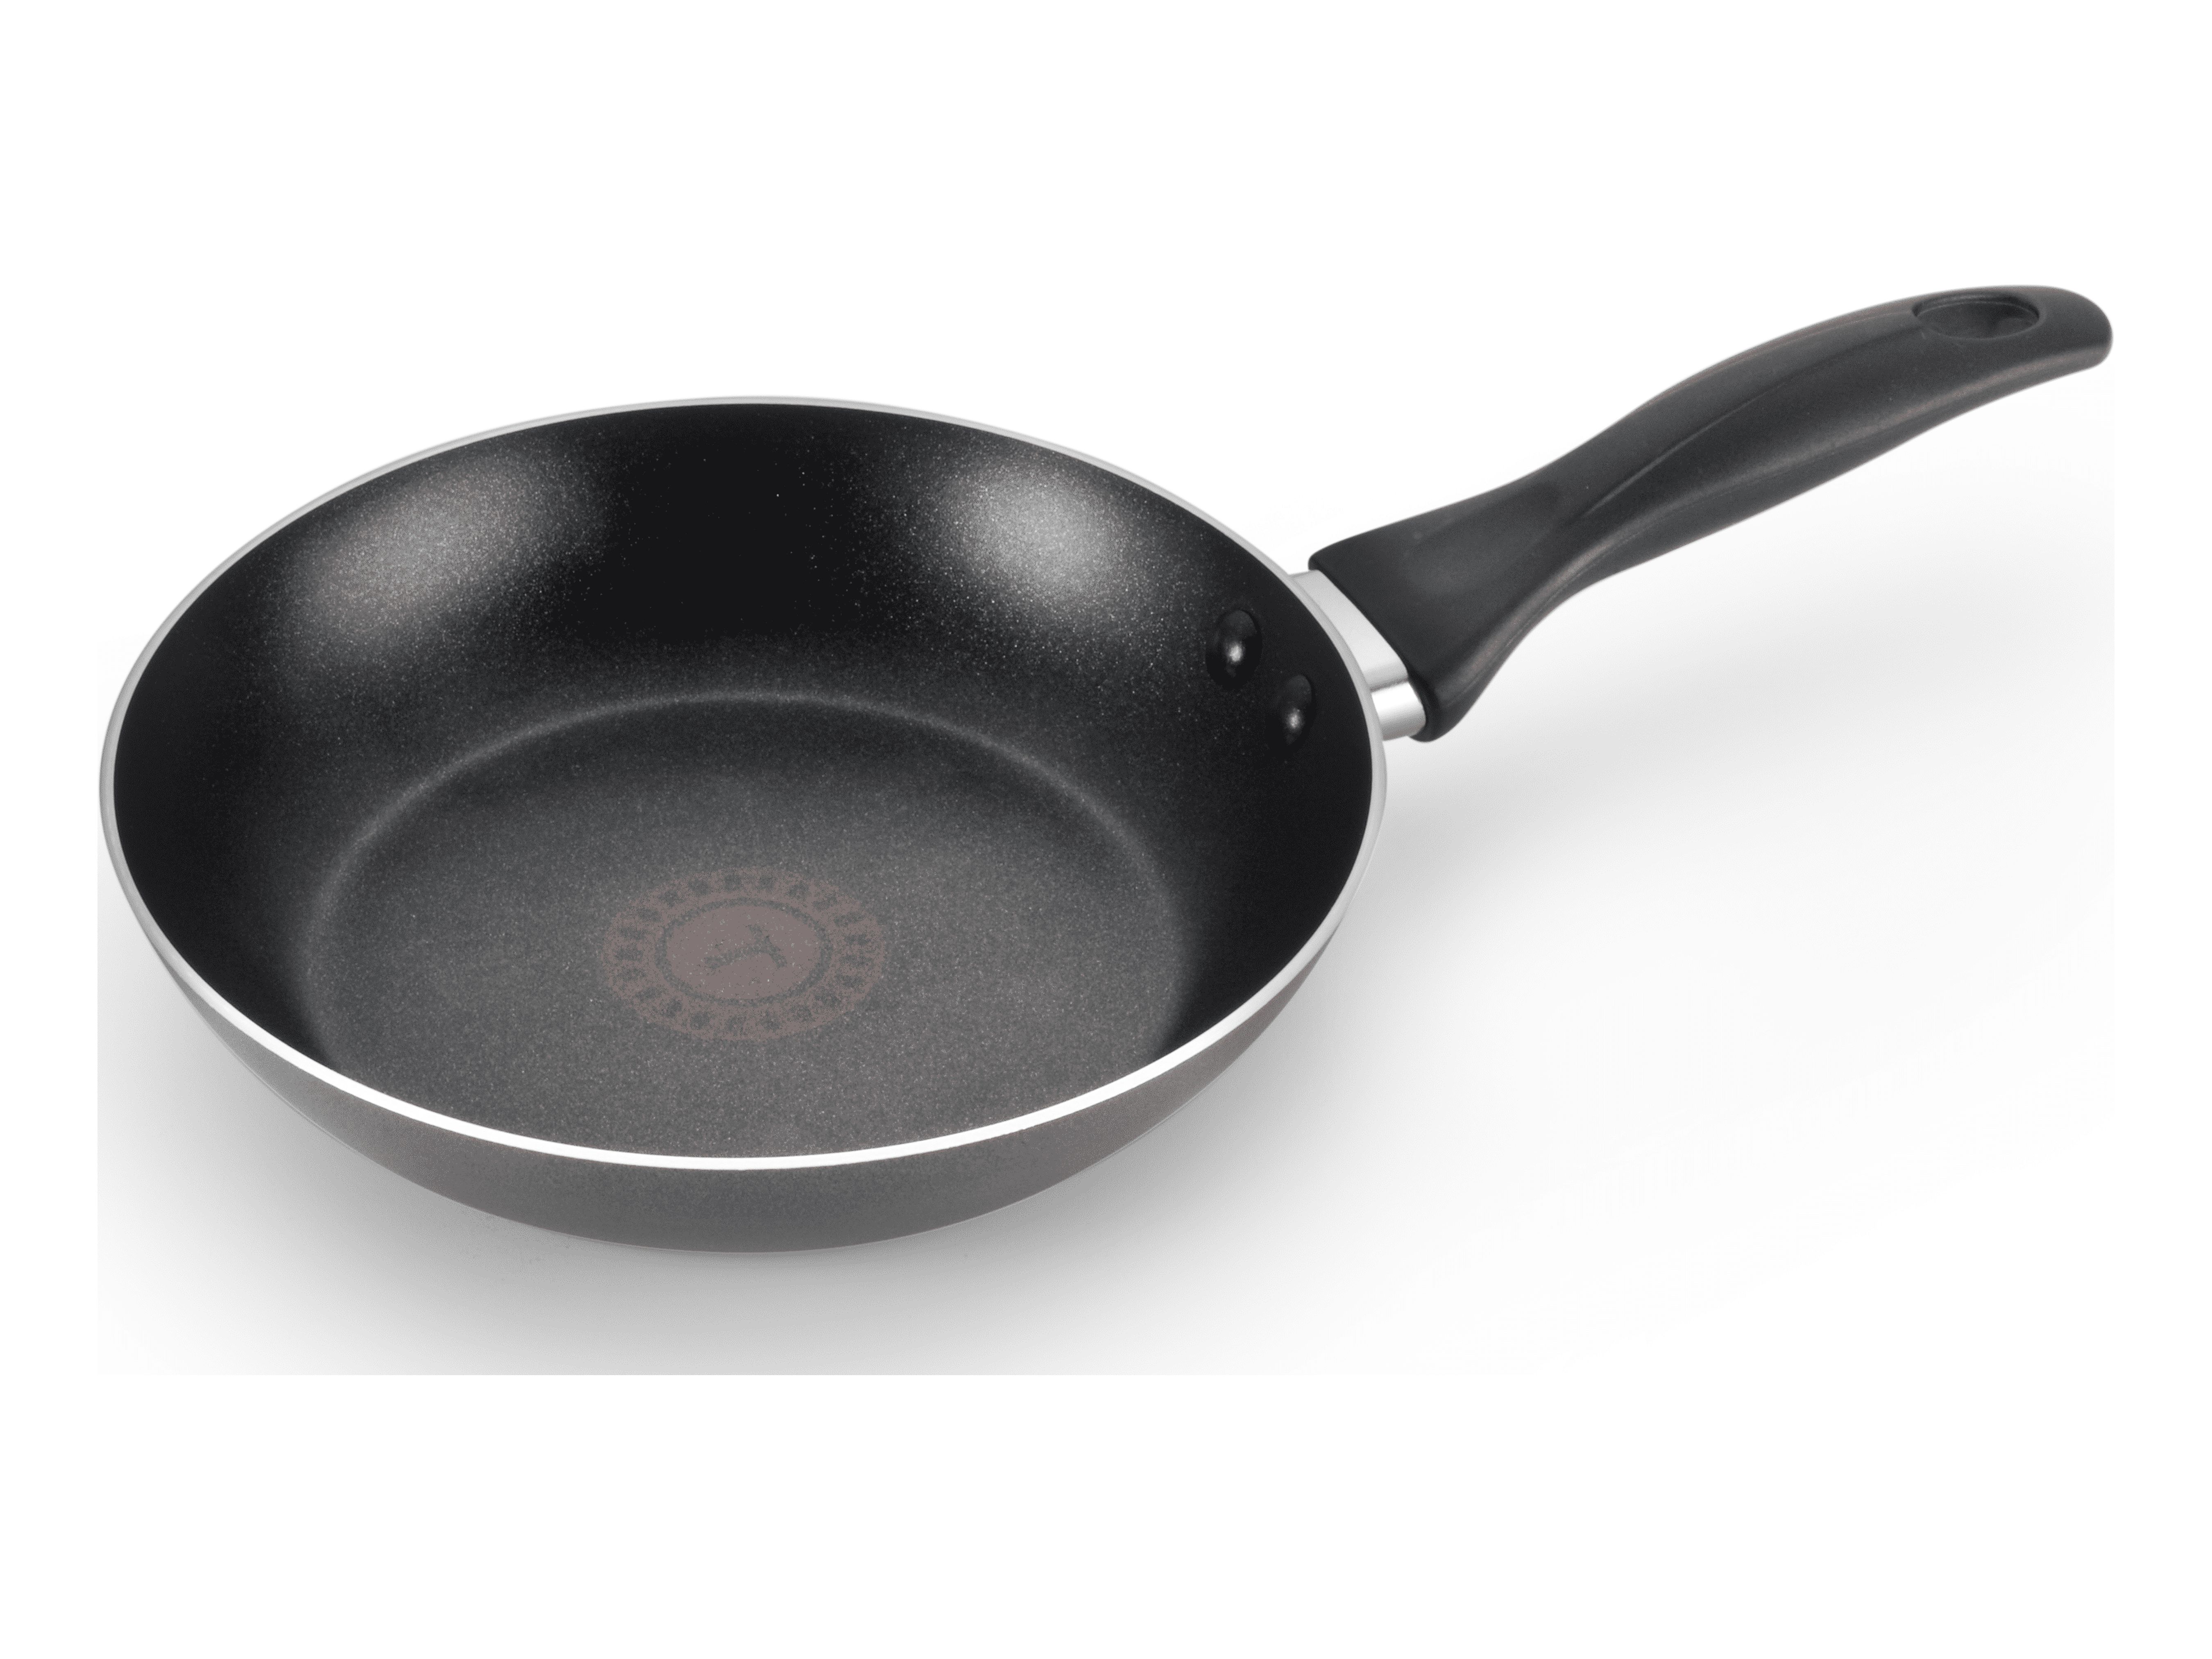 T-fal Easy Care 8" Nonstick Frypan, Black - image 1 of 7